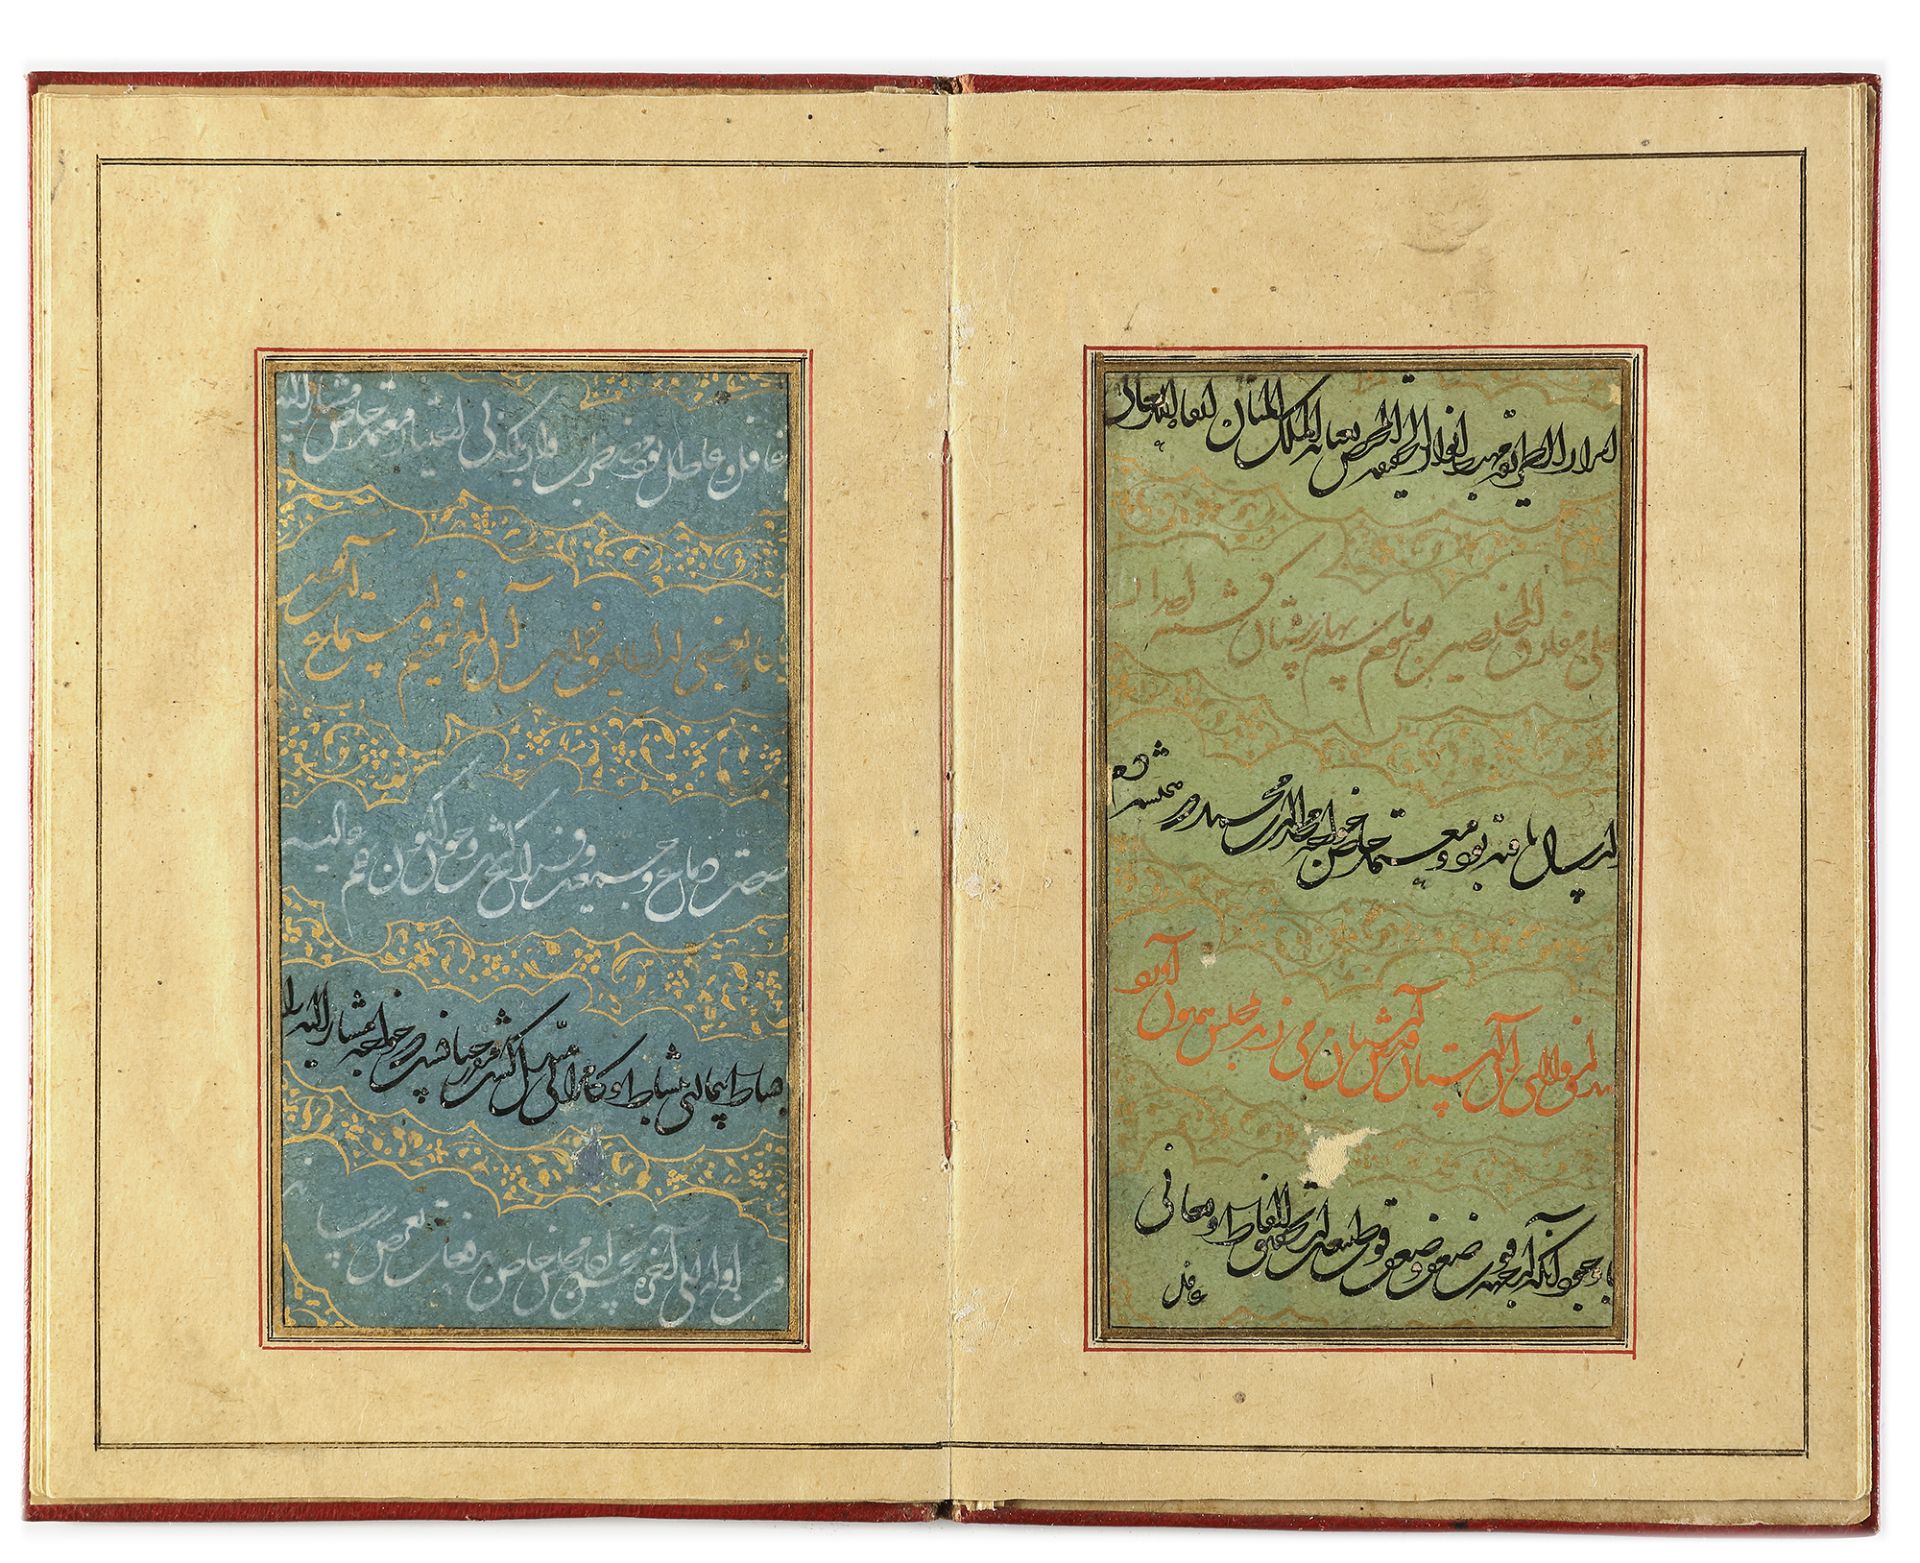 A MANUSCRIPT OF POETRY, SIGNED BY IKHTIYAR AL-MUNSHI, PERSIA, SAVAFID, DATED 975 AH/1567-68 AD - Image 4 of 18